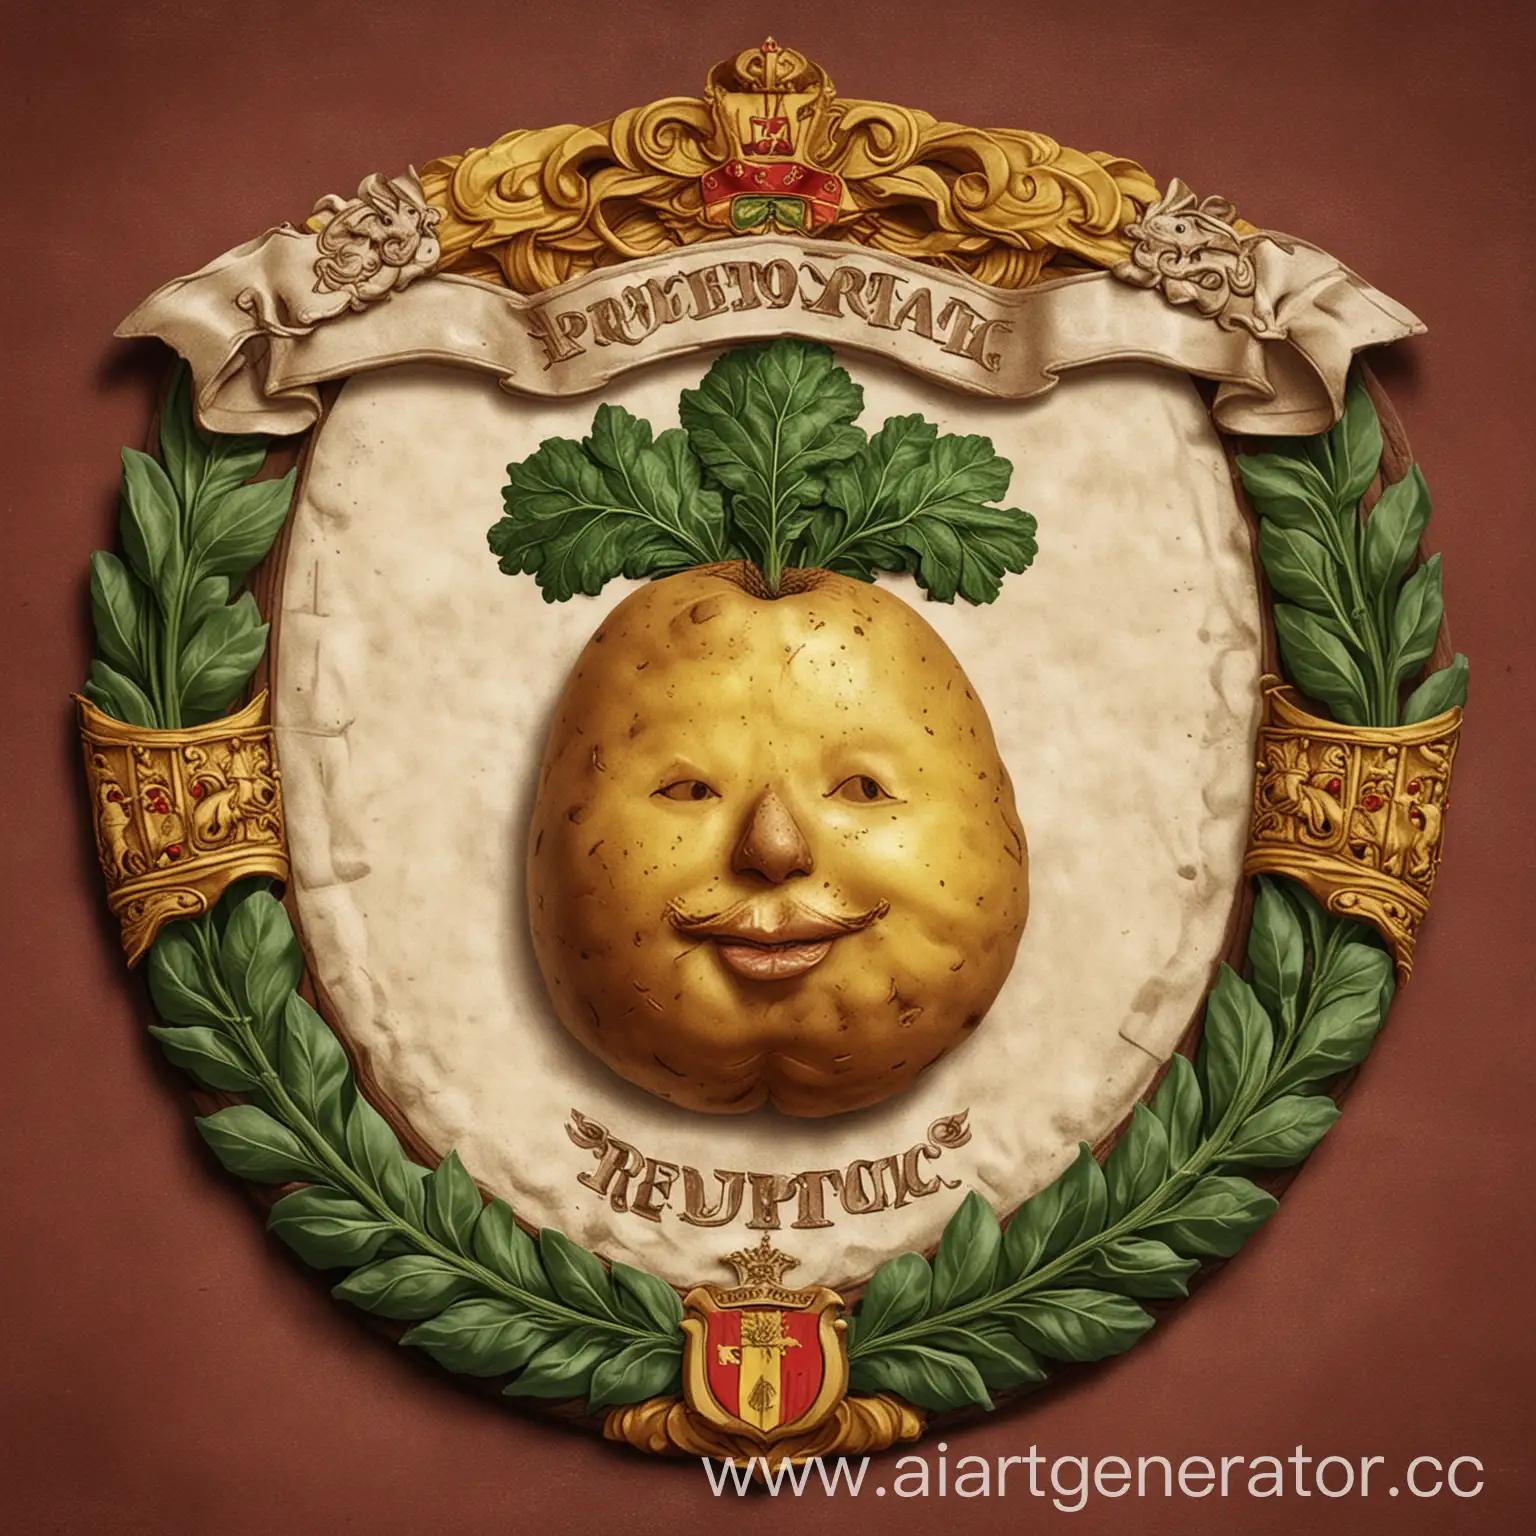 Coat-of-Arms-of-the-Potato-Republic-Symbolic-Emblem-of-Nations-Identity-and-Heritage